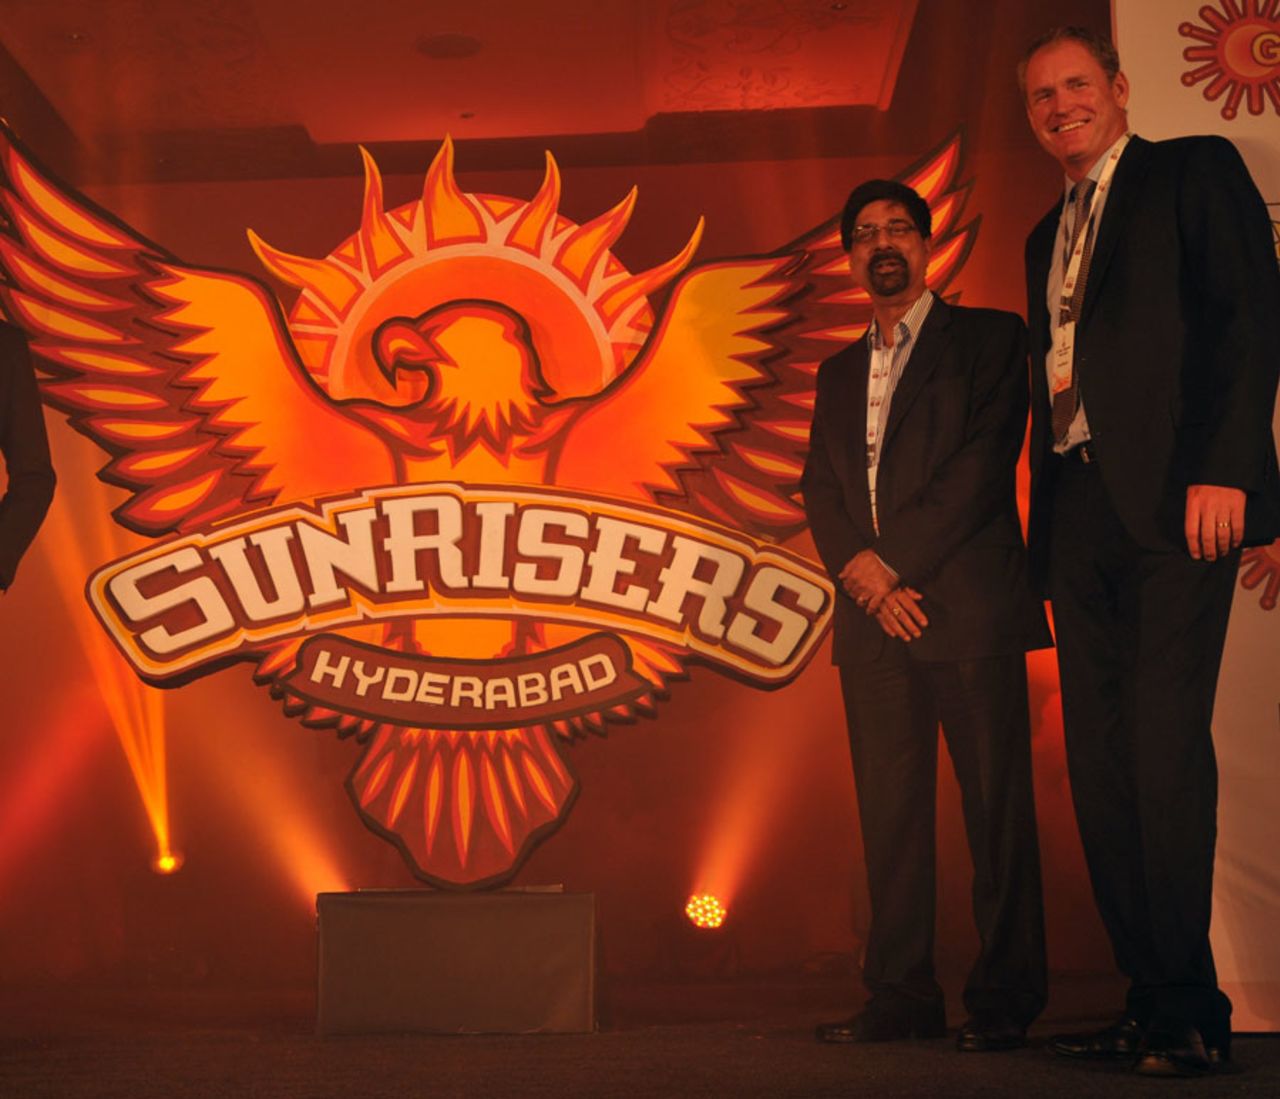 Sunrisers Hyderabad's mentor Kris Srikkanth and coach Tom Moody at the IPL franchise's logo launch, December 20, 2012